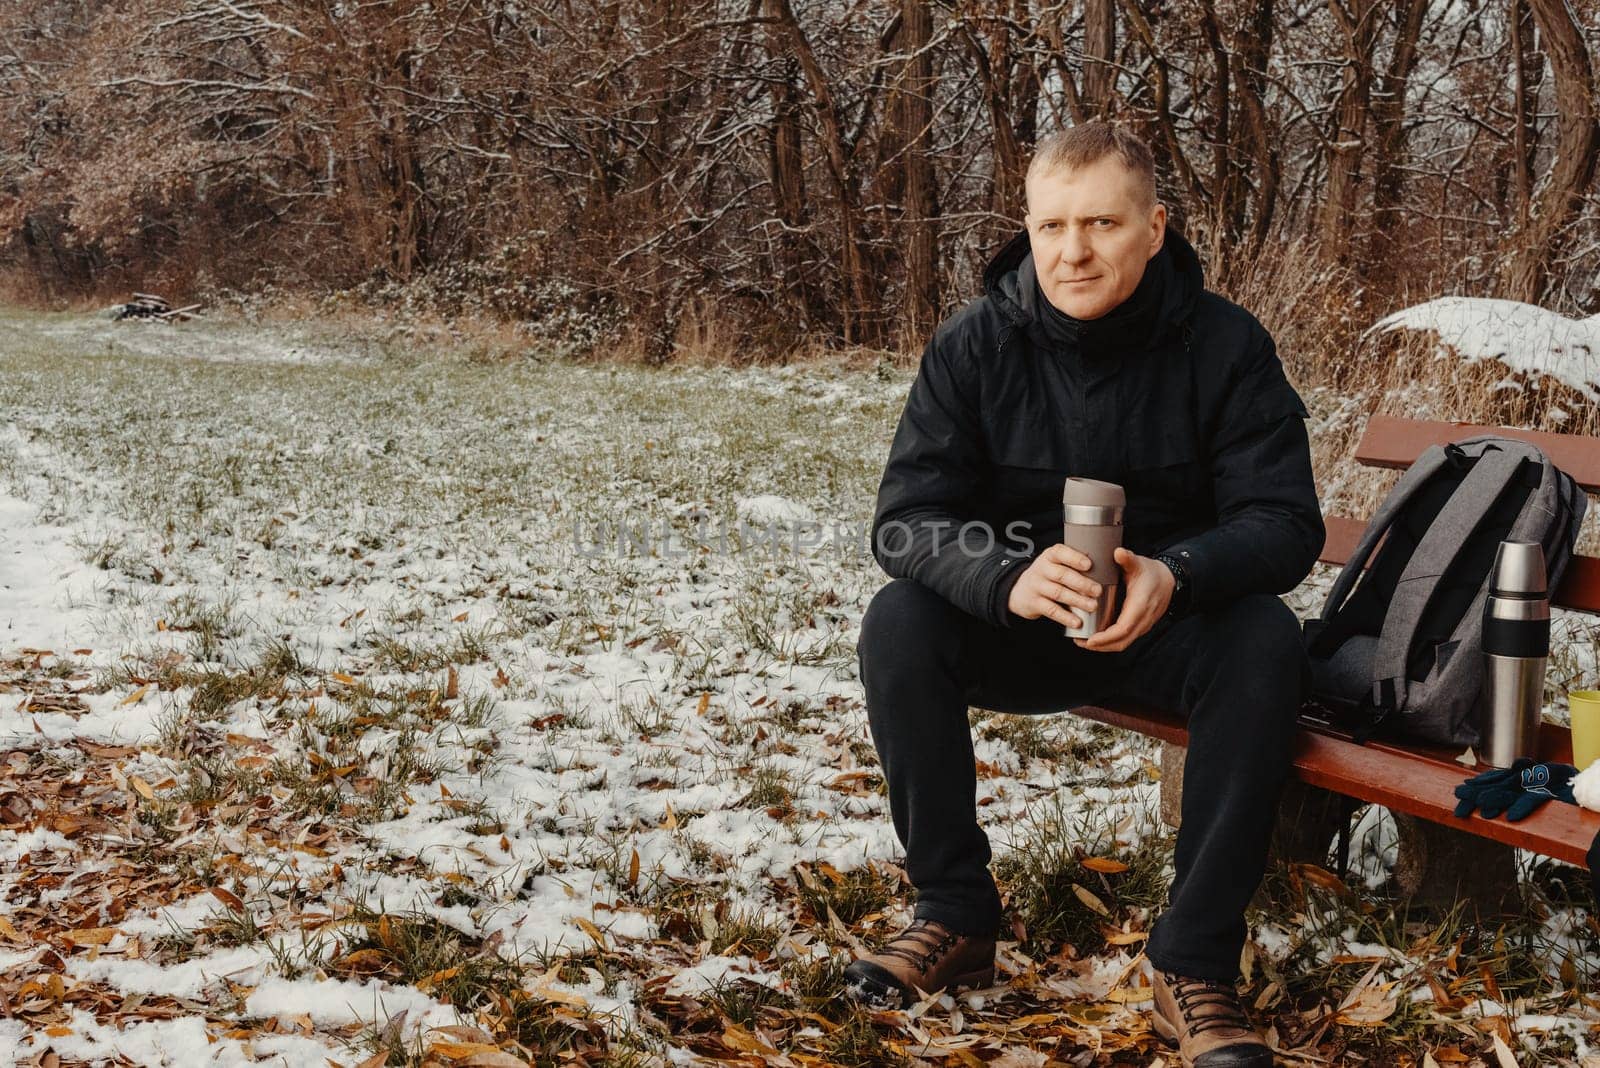 Winter Serenity: 40-Year-Old Man Enjoying Tea on Snow-Covered Bench in Rural Park. Immerse yourself in the tranquil beauty of winter as a 40-year-old man finds solace on a snowy bench in a rural park. by Andrii_Ko